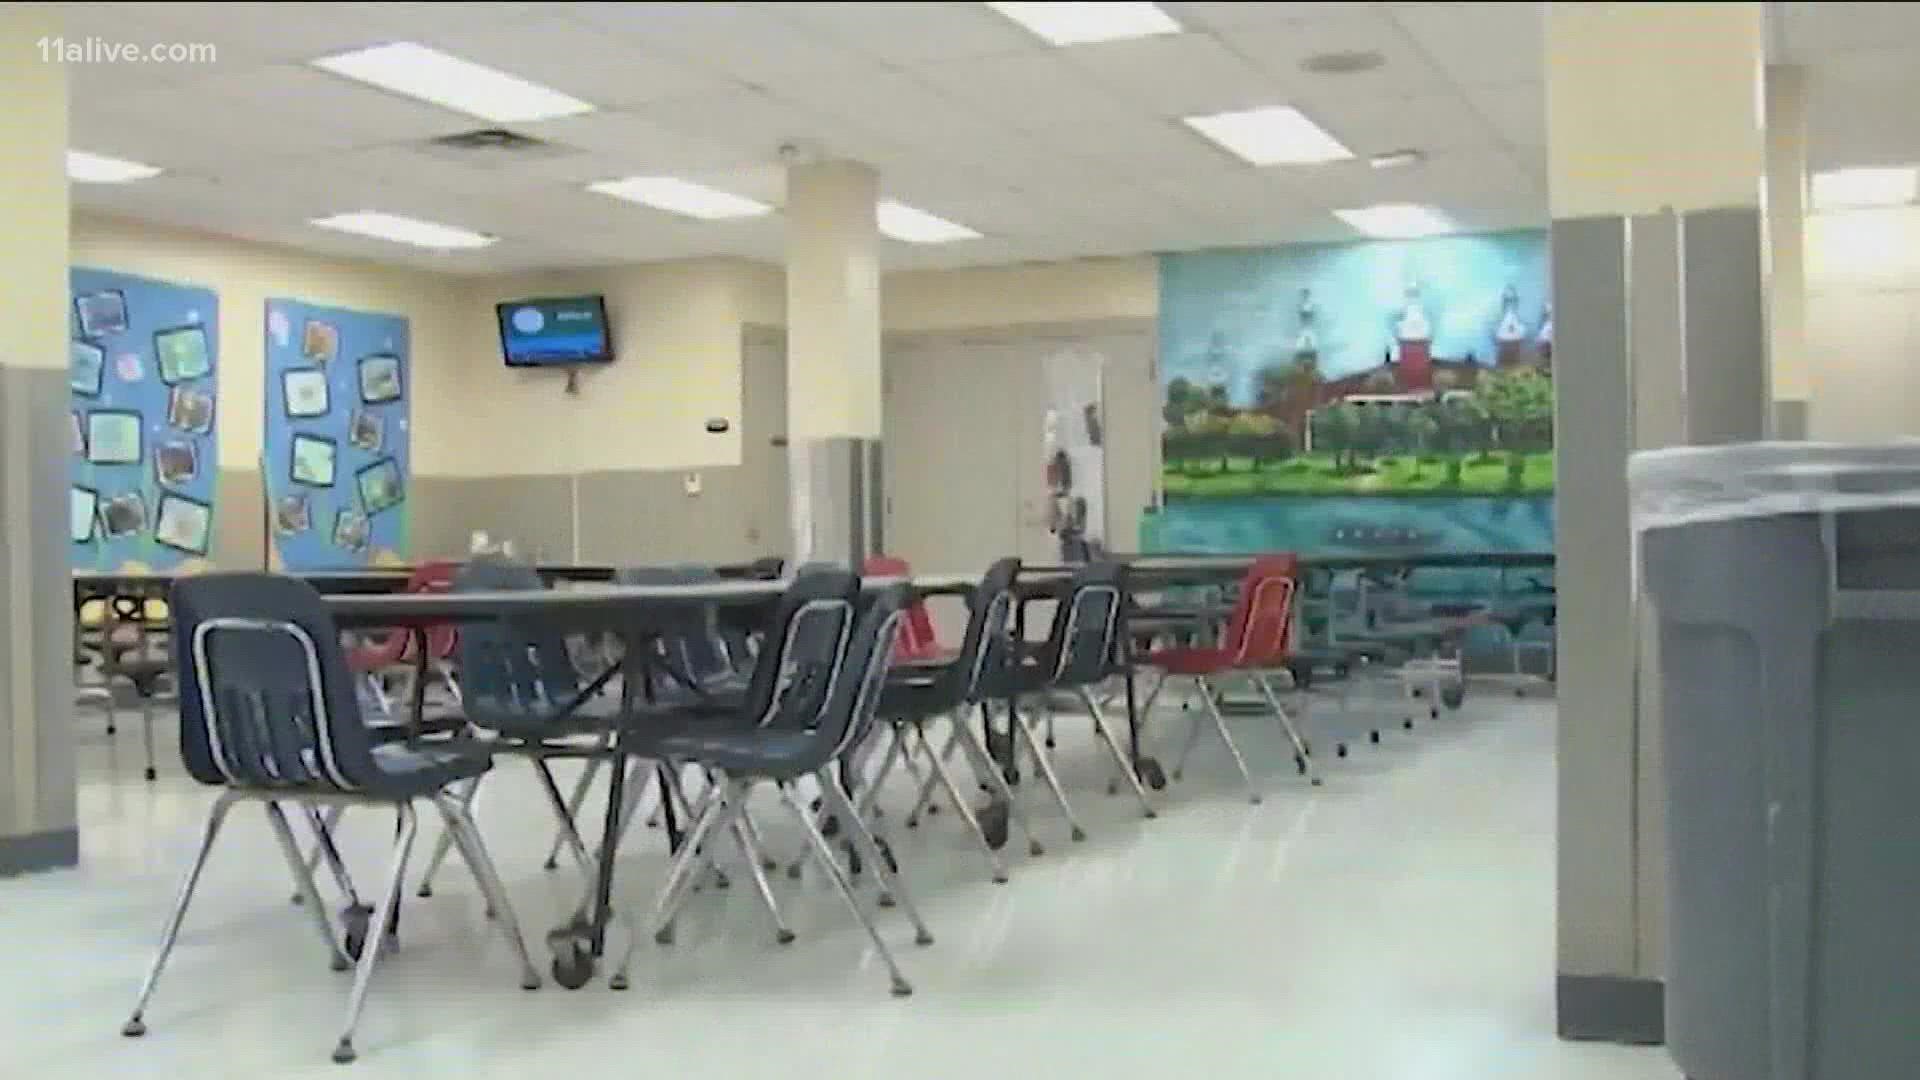 Two counties in southeast Georgia are closing schools and offices after recent outbreaks.